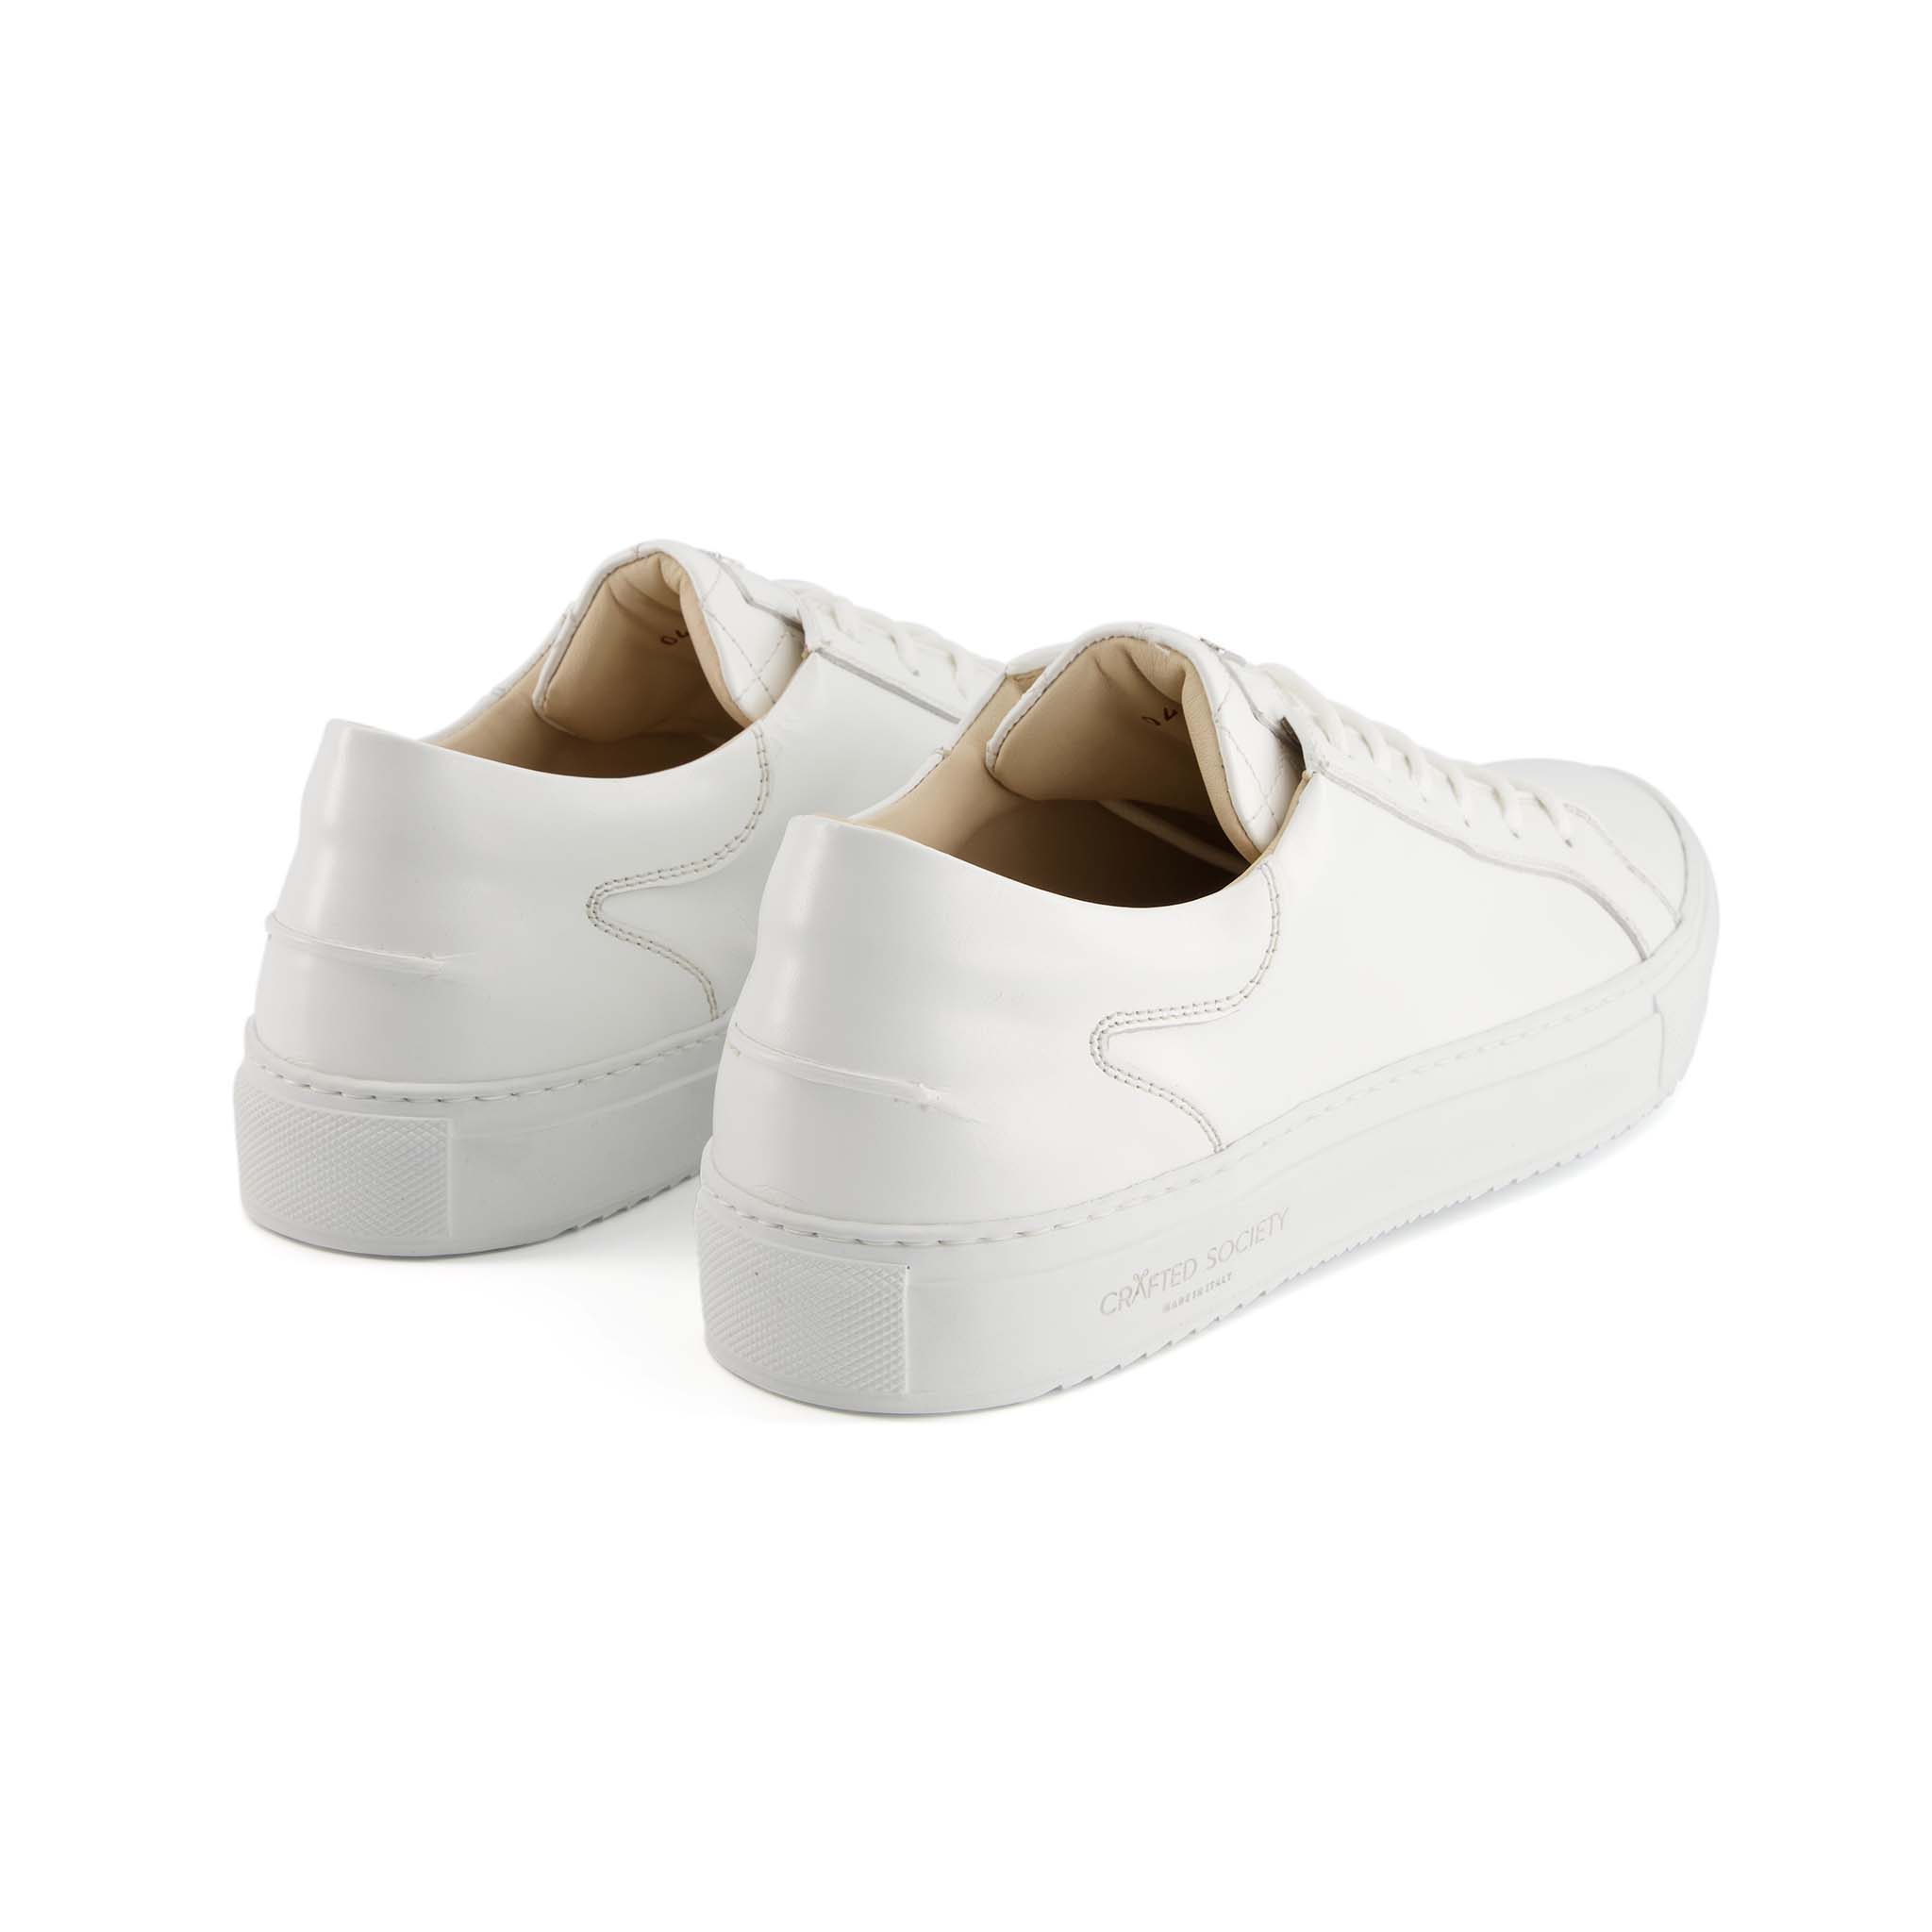 Mario Low Refined Sneaker | White Full Grain Leather | White Outsole | Made in Italy